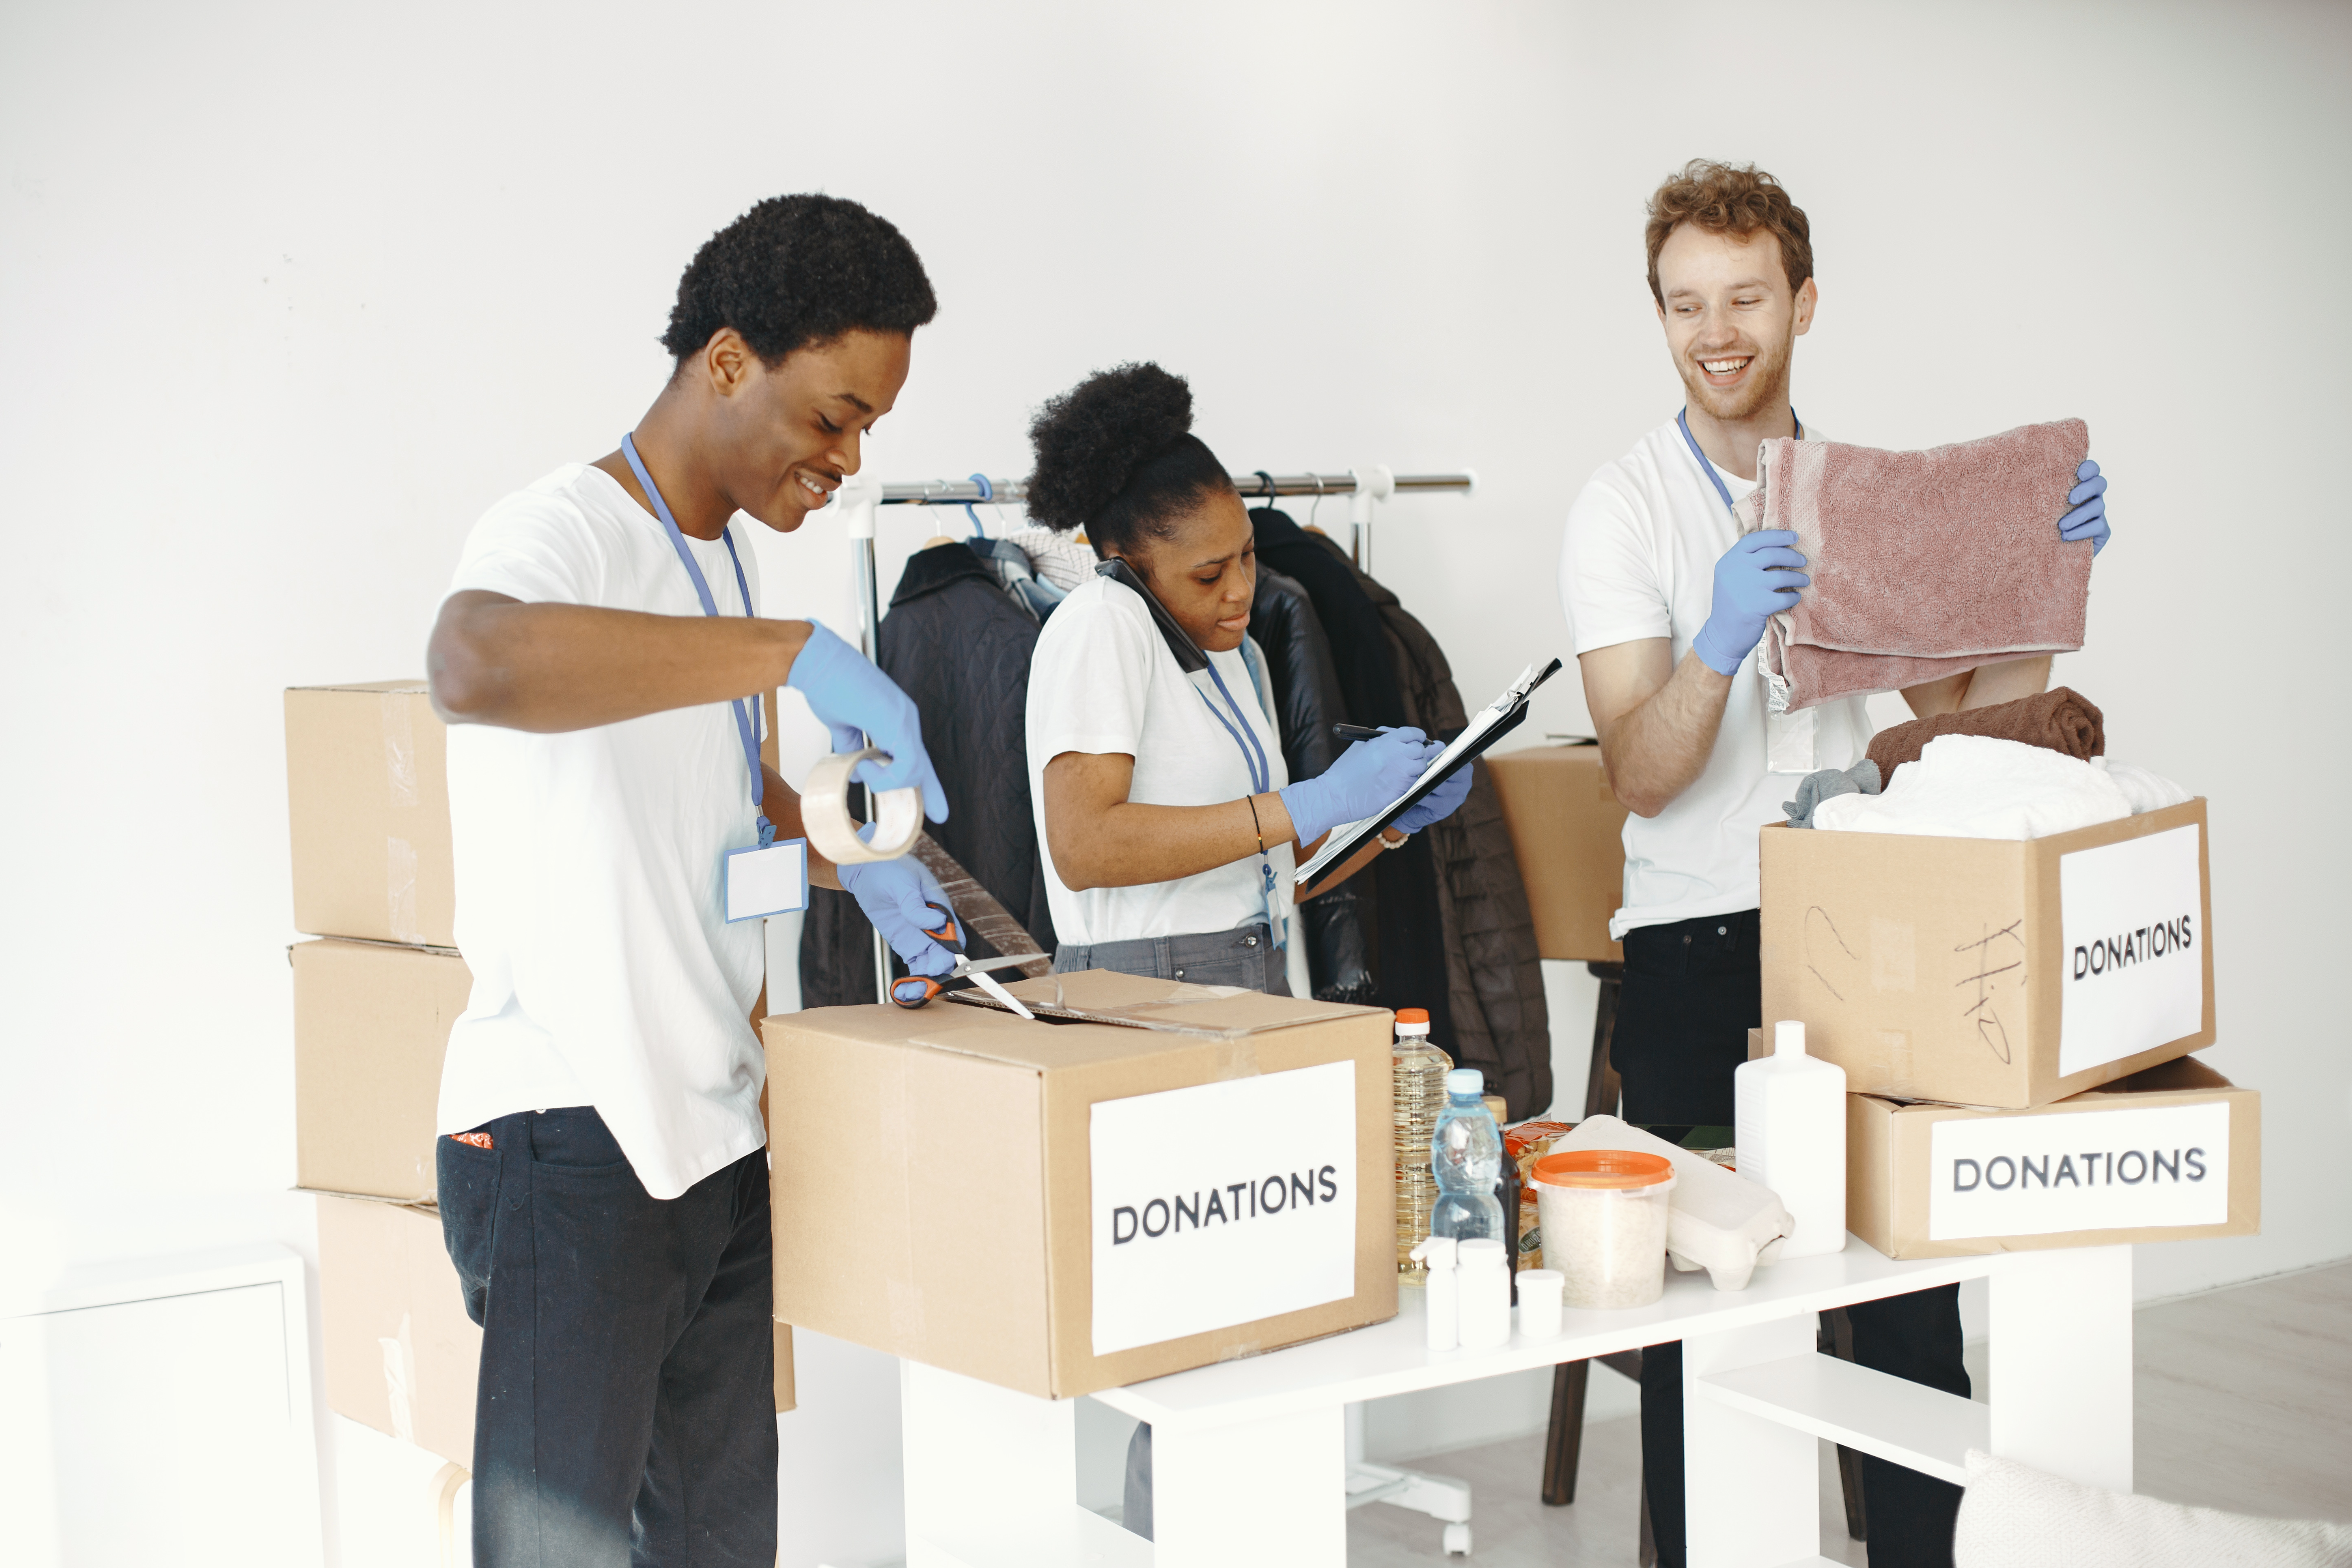 Three nonprofit volunteers assist in sorting through donations, tracking the items on a clipboard, and taping shut boxes full of ready-to-go donations. ERP software can help the nonprofit as a whole be empowered with streamlined processes.